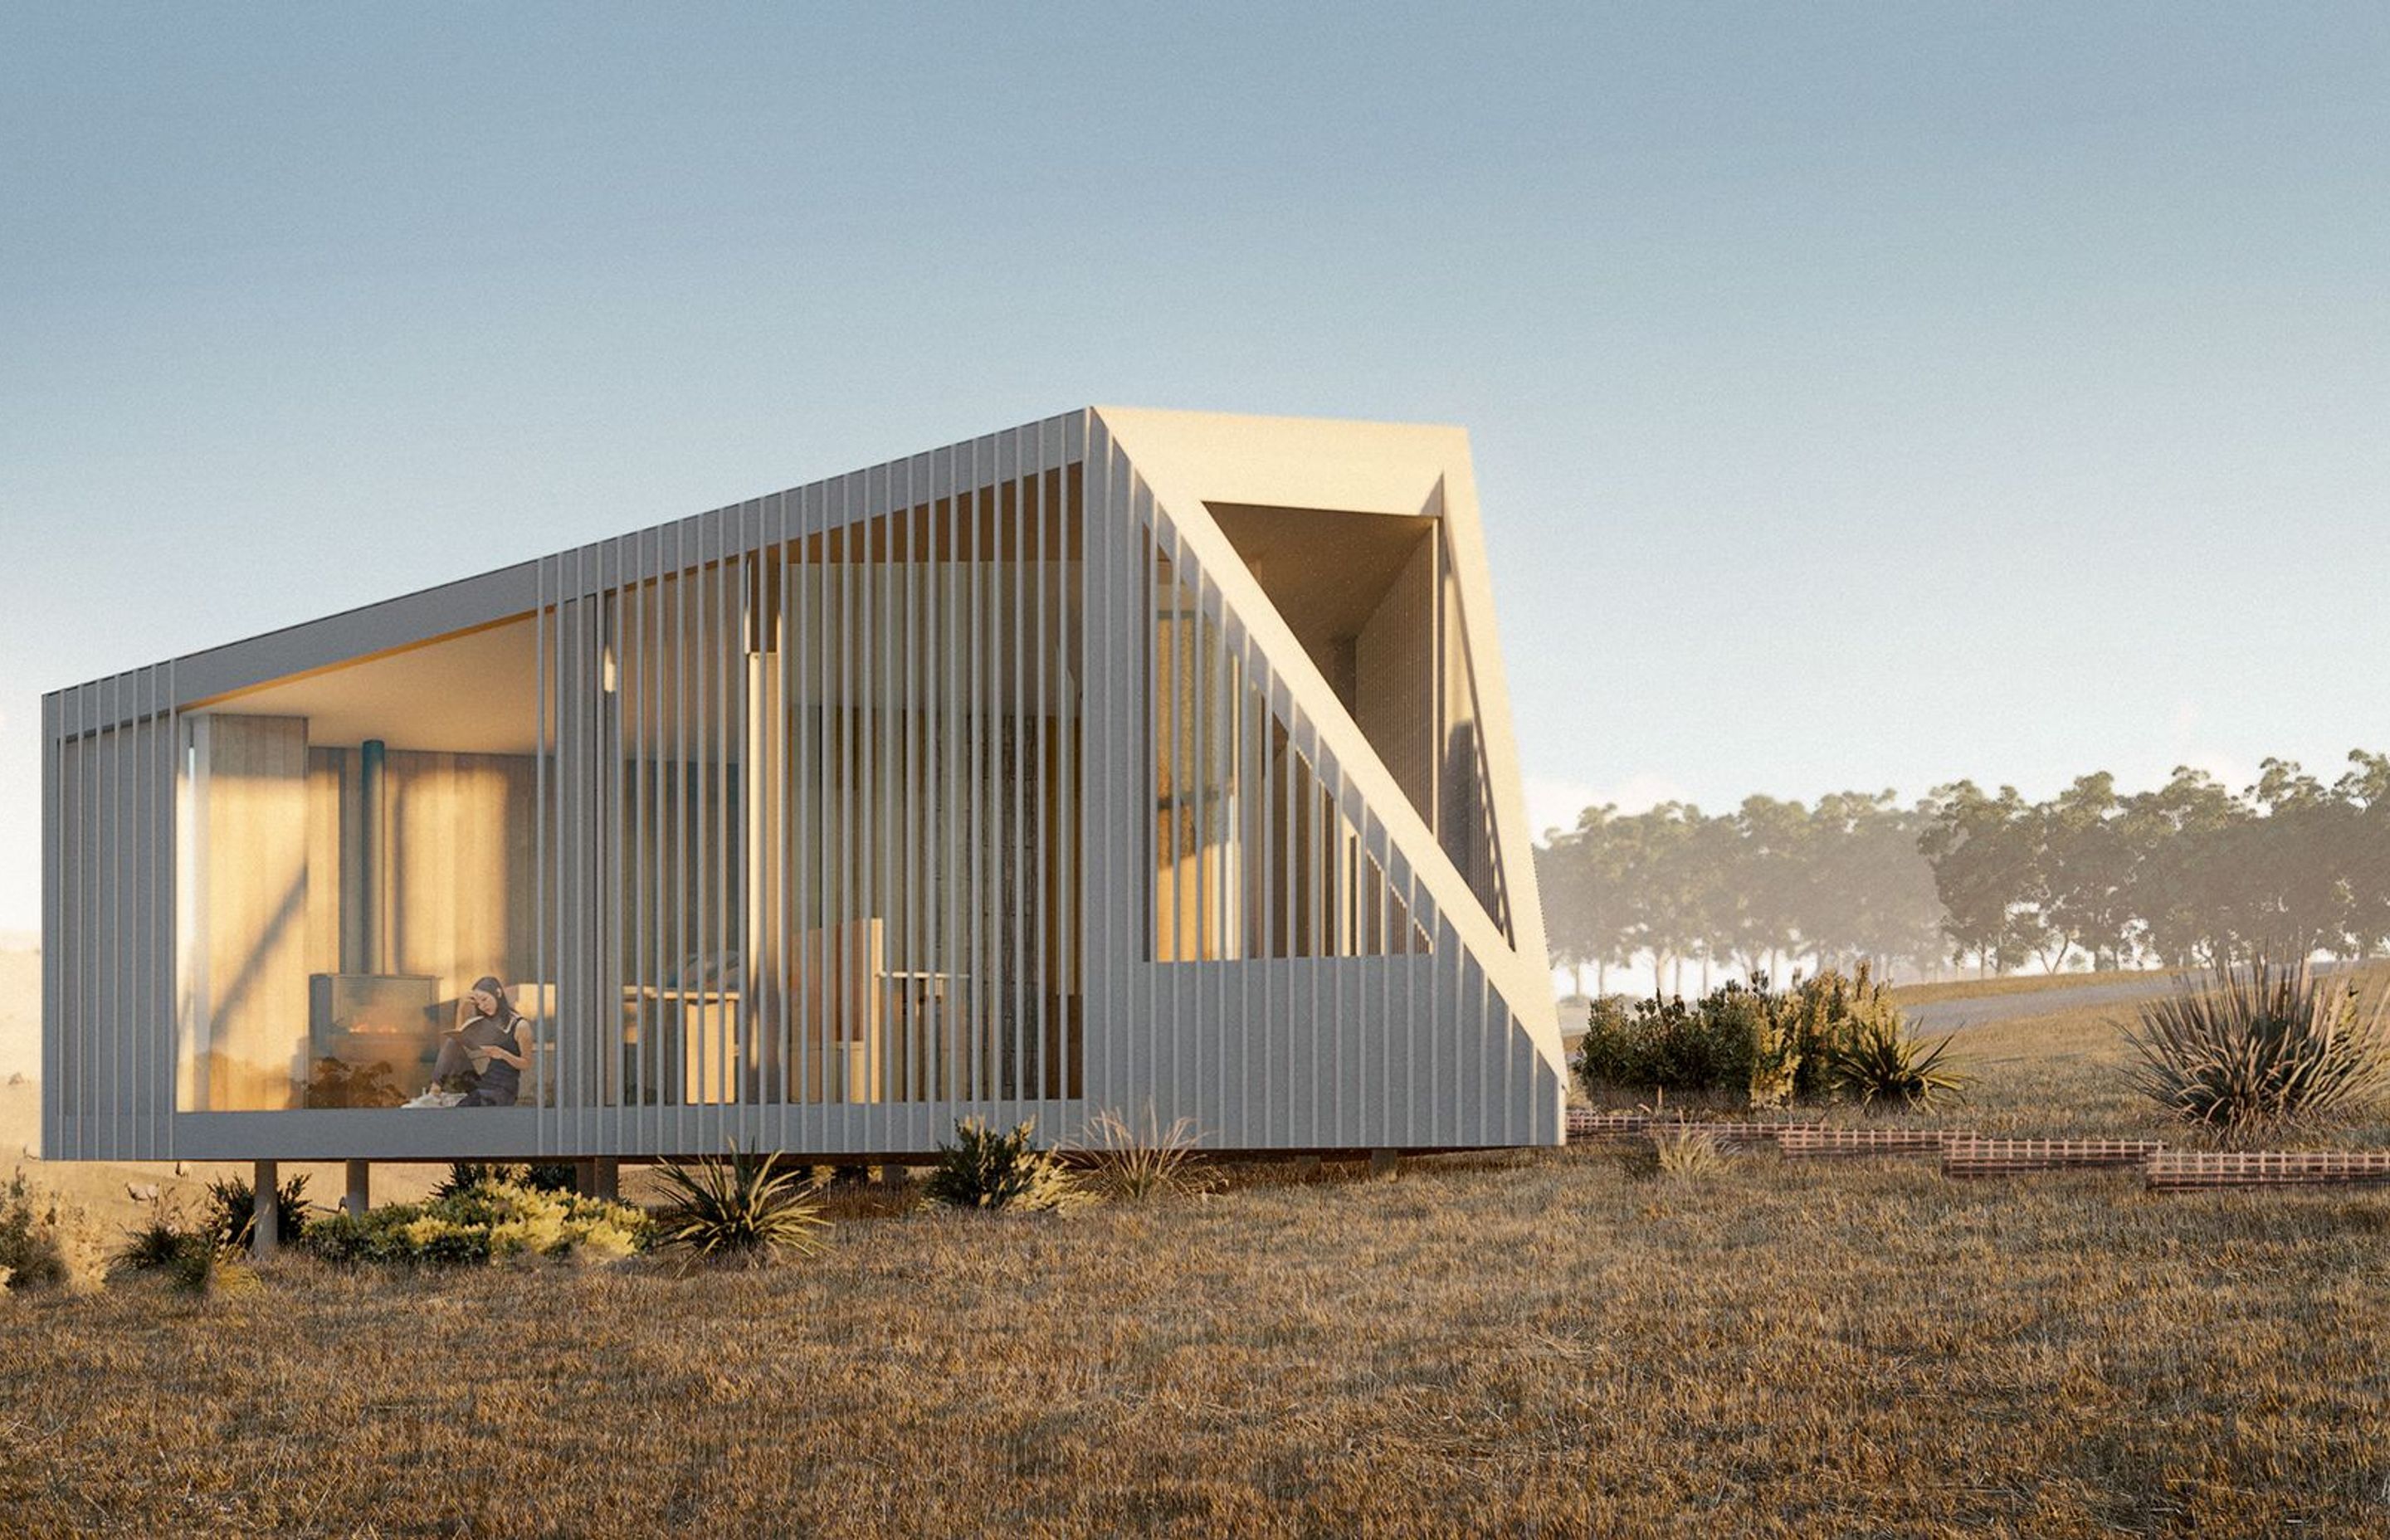 Our first major South Australian project, Ponderosa